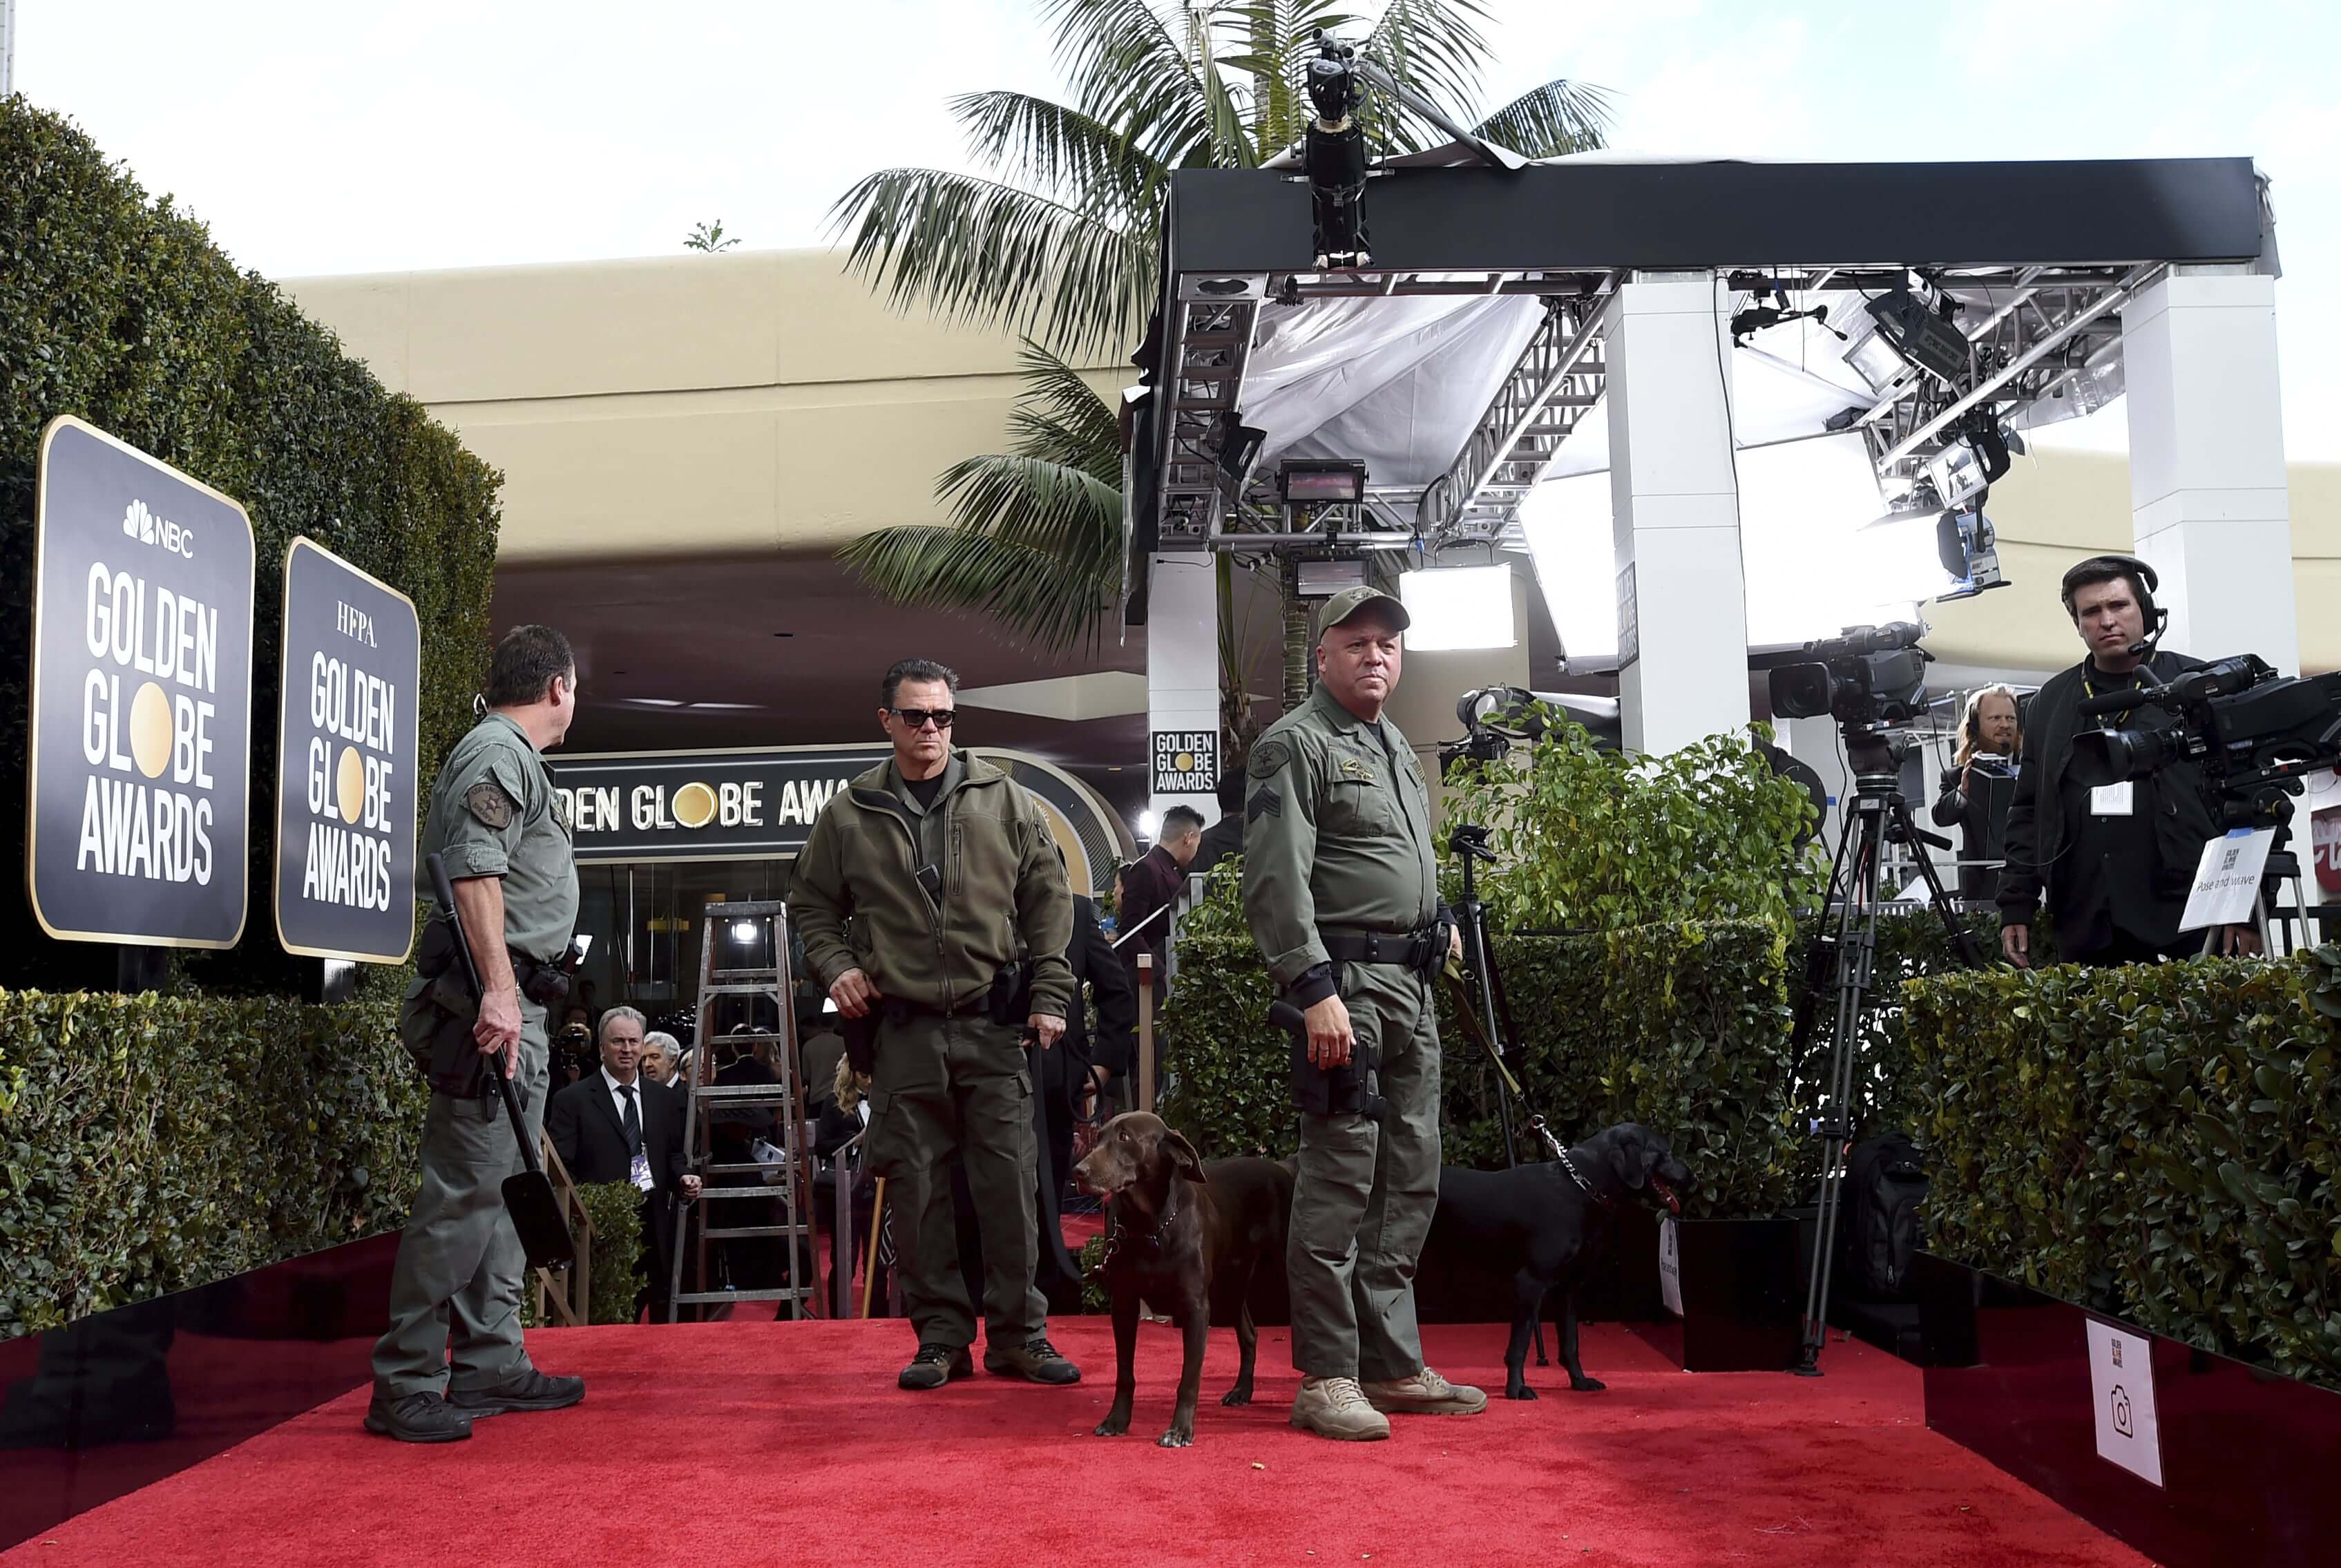 Law enforcement officers do a security sweep of the red carpet at the 76th annual Golden Globe Awards at the Beverly Hilton Hotel on Jan. 6, 2019, in Beverly Hills, California.